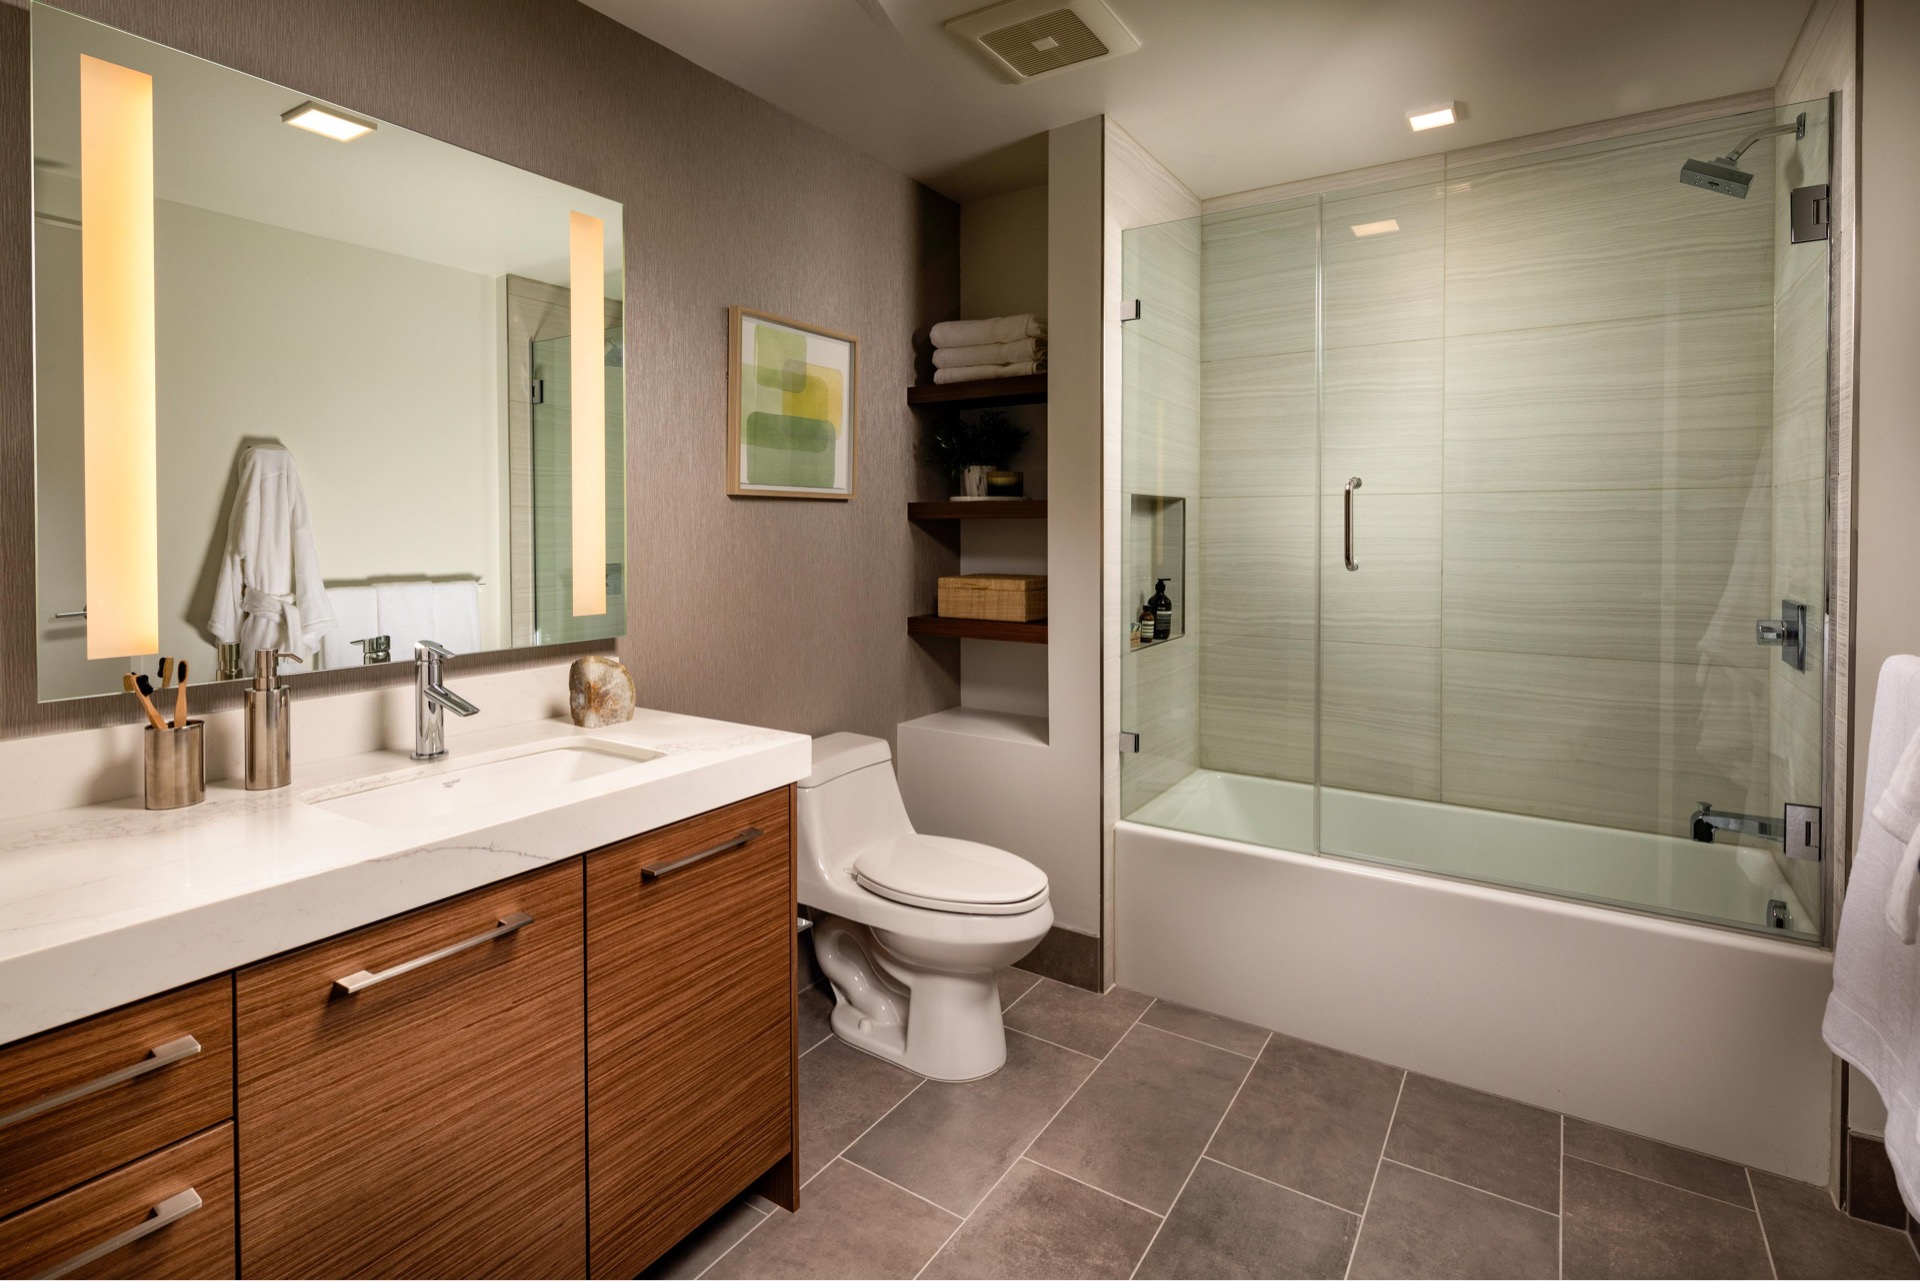 Bathroom with large vanity space and porcelian tile